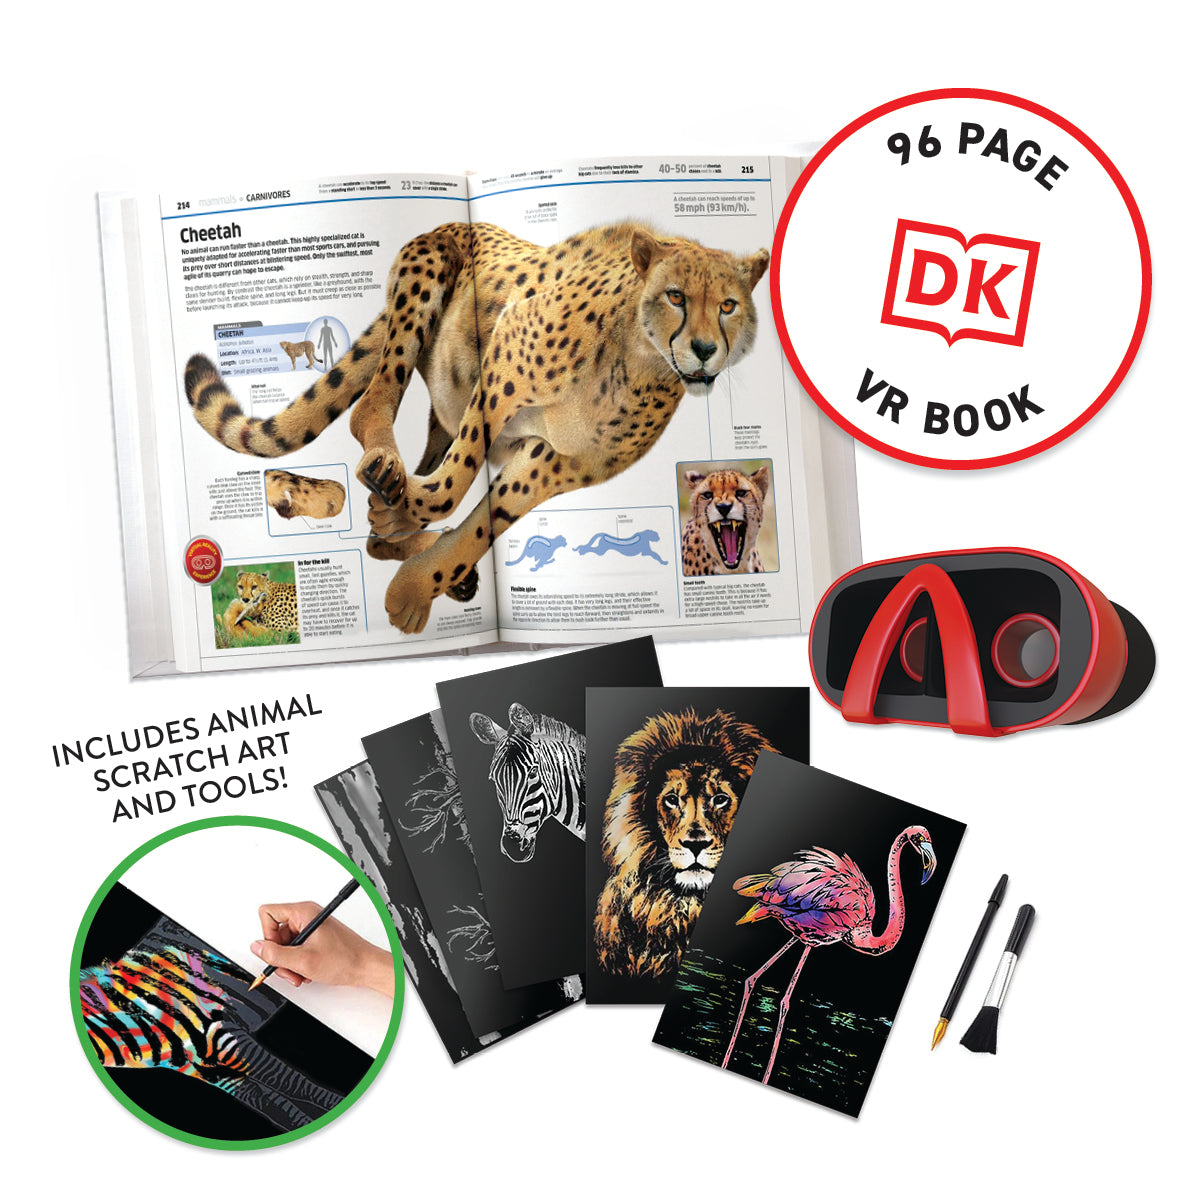 Virtual Reality Discovery Gift Set w/ DK Book - Animals!